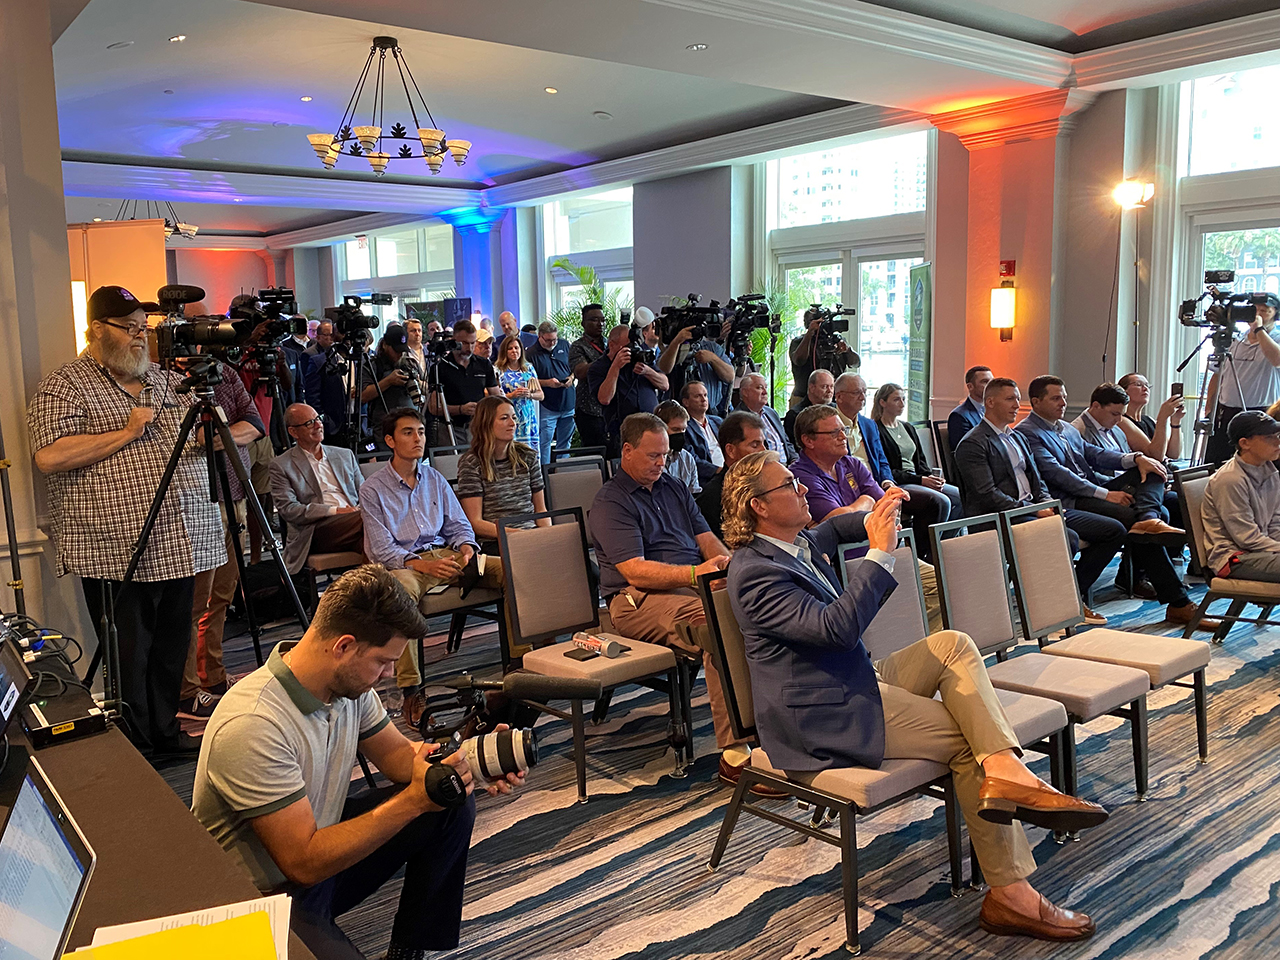 Media were on hand for the big announcement